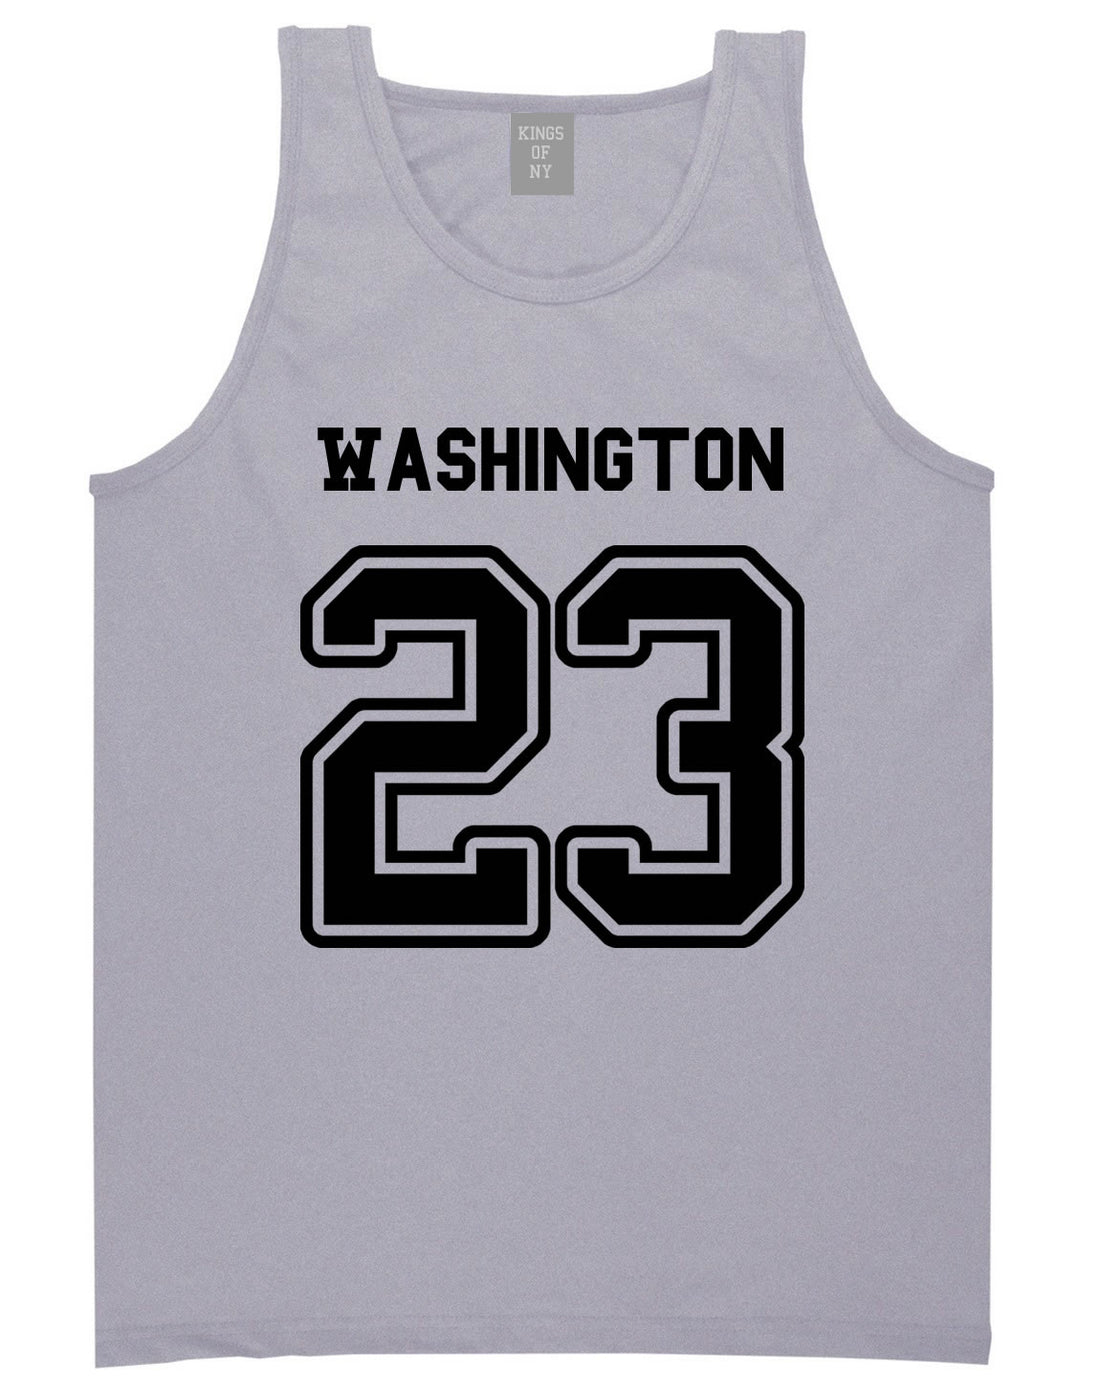 Sport Style Washington 23 Team State Jersey Mens Tank Top By Kings Of NY